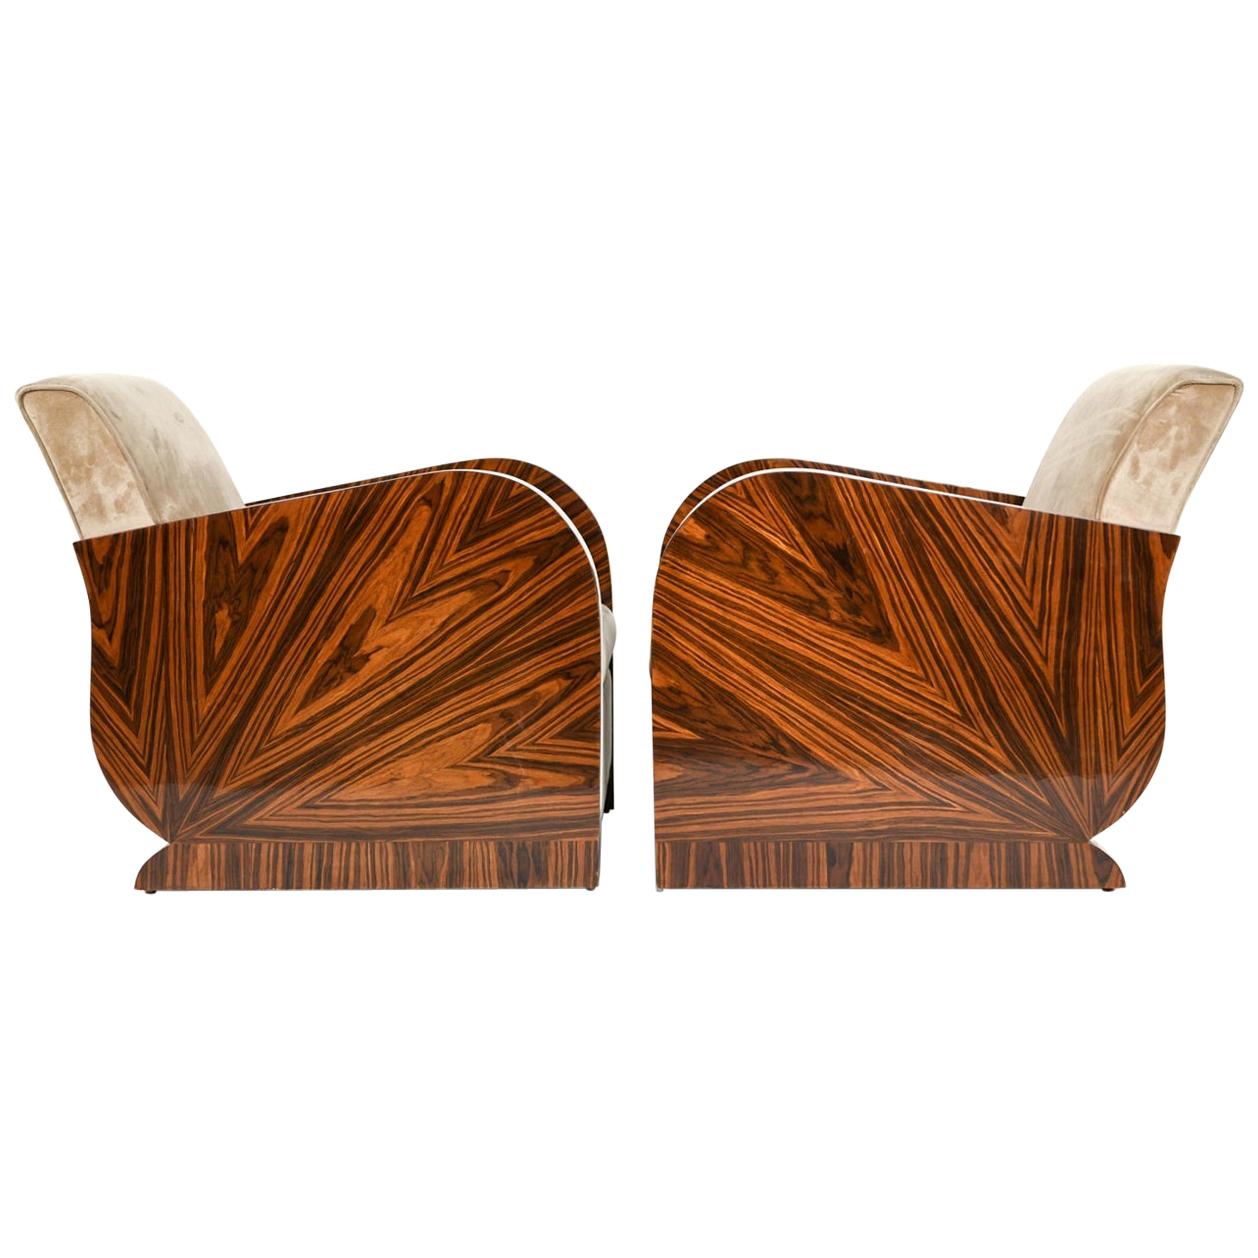 Pair of French Art Deco Style Zebra Wood Lounge Chairs